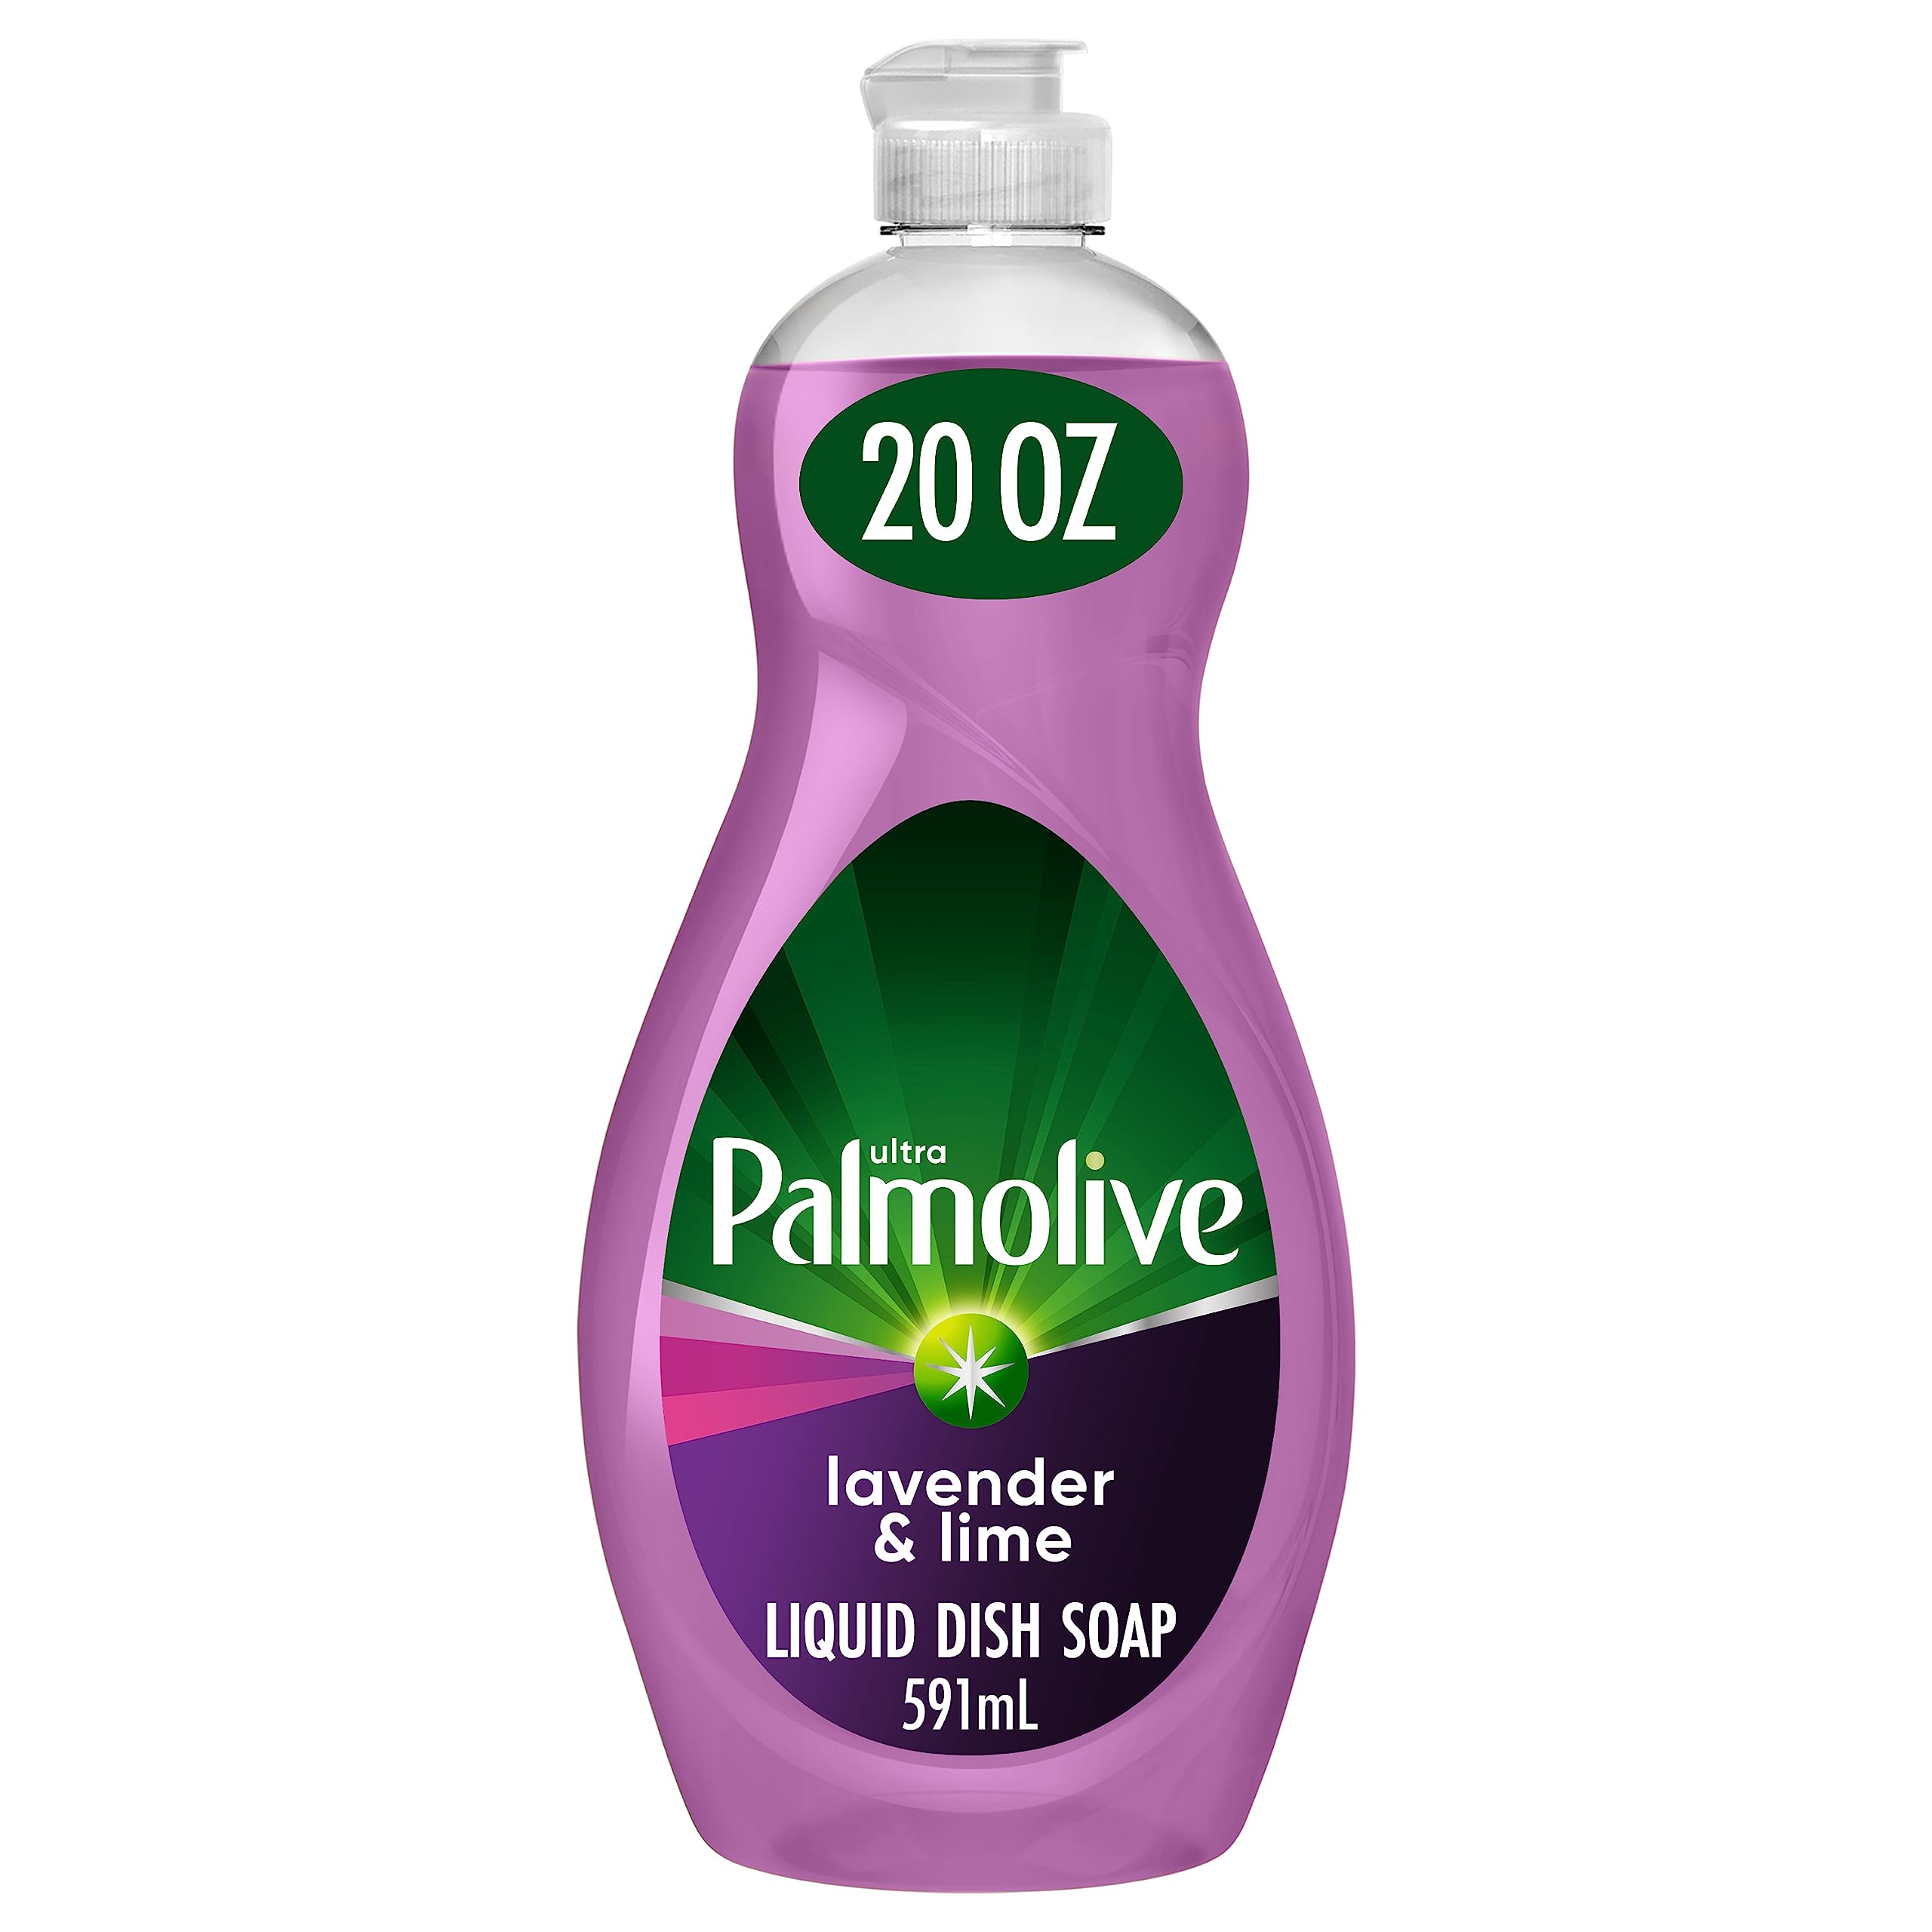 20-Oz Palmolive Ultra Liquid Dish Soap (Lavender & Lime) $2 w/ S&S + Free Shipping w/ Prime or on $35+